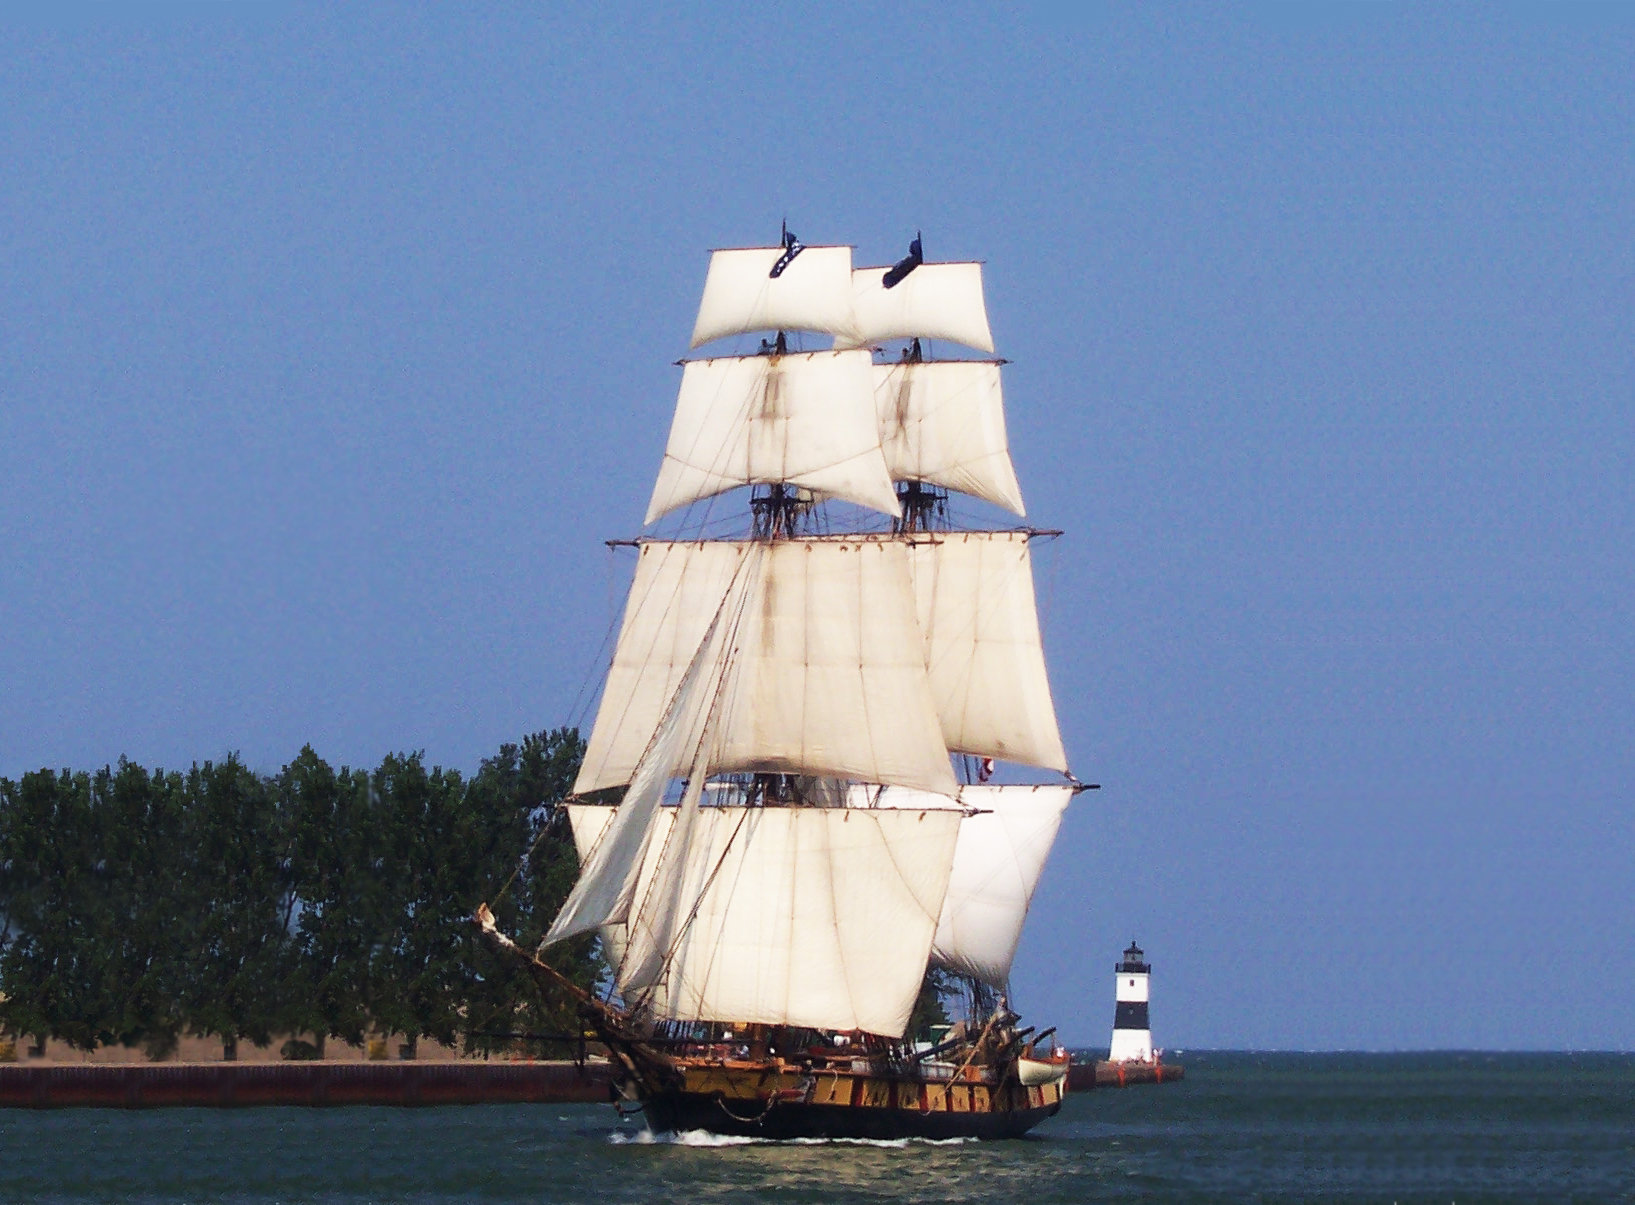 The Brig Niagara at full sail in the Erie Channel